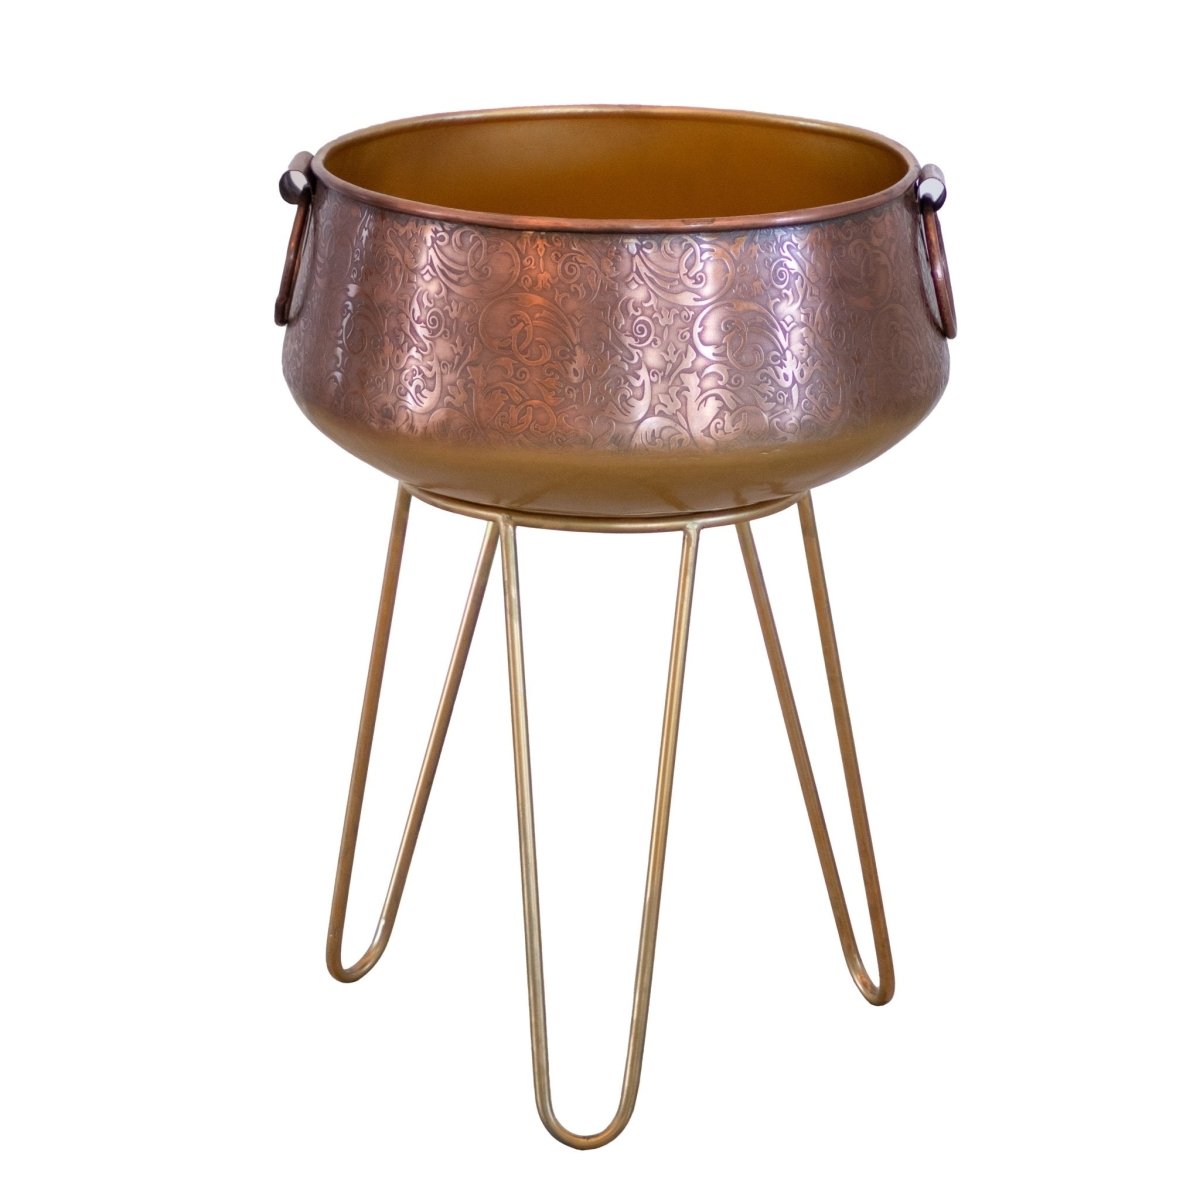 Kezevel Metal Planter with Stand - Handcrafted Antique Copper and Gold Plant Pot Holder, Indoor Planter Pot for Home Decor Size Big / Small - Kezevel